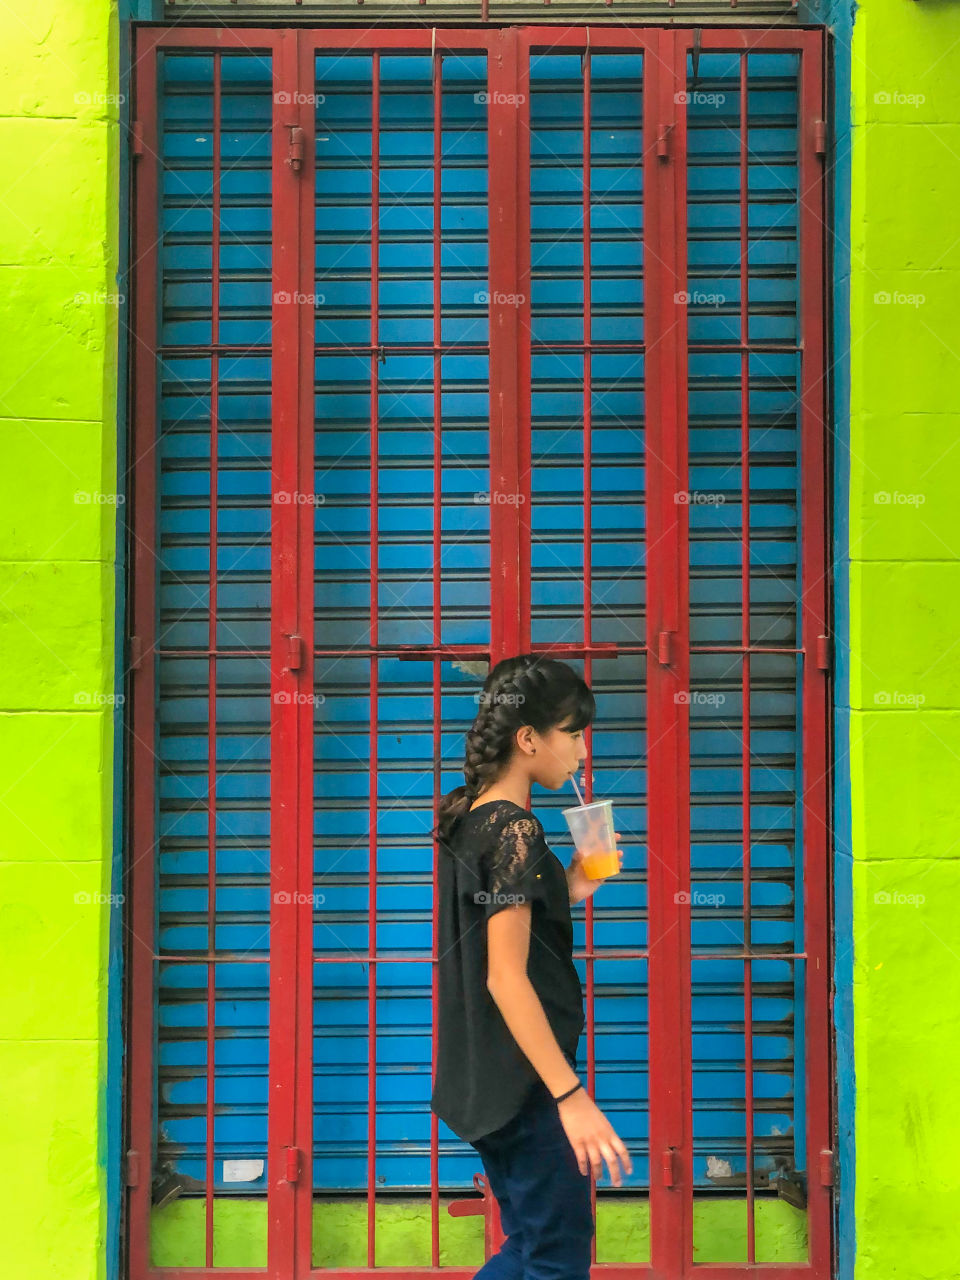 Girl divining juice in a Colorful wall 